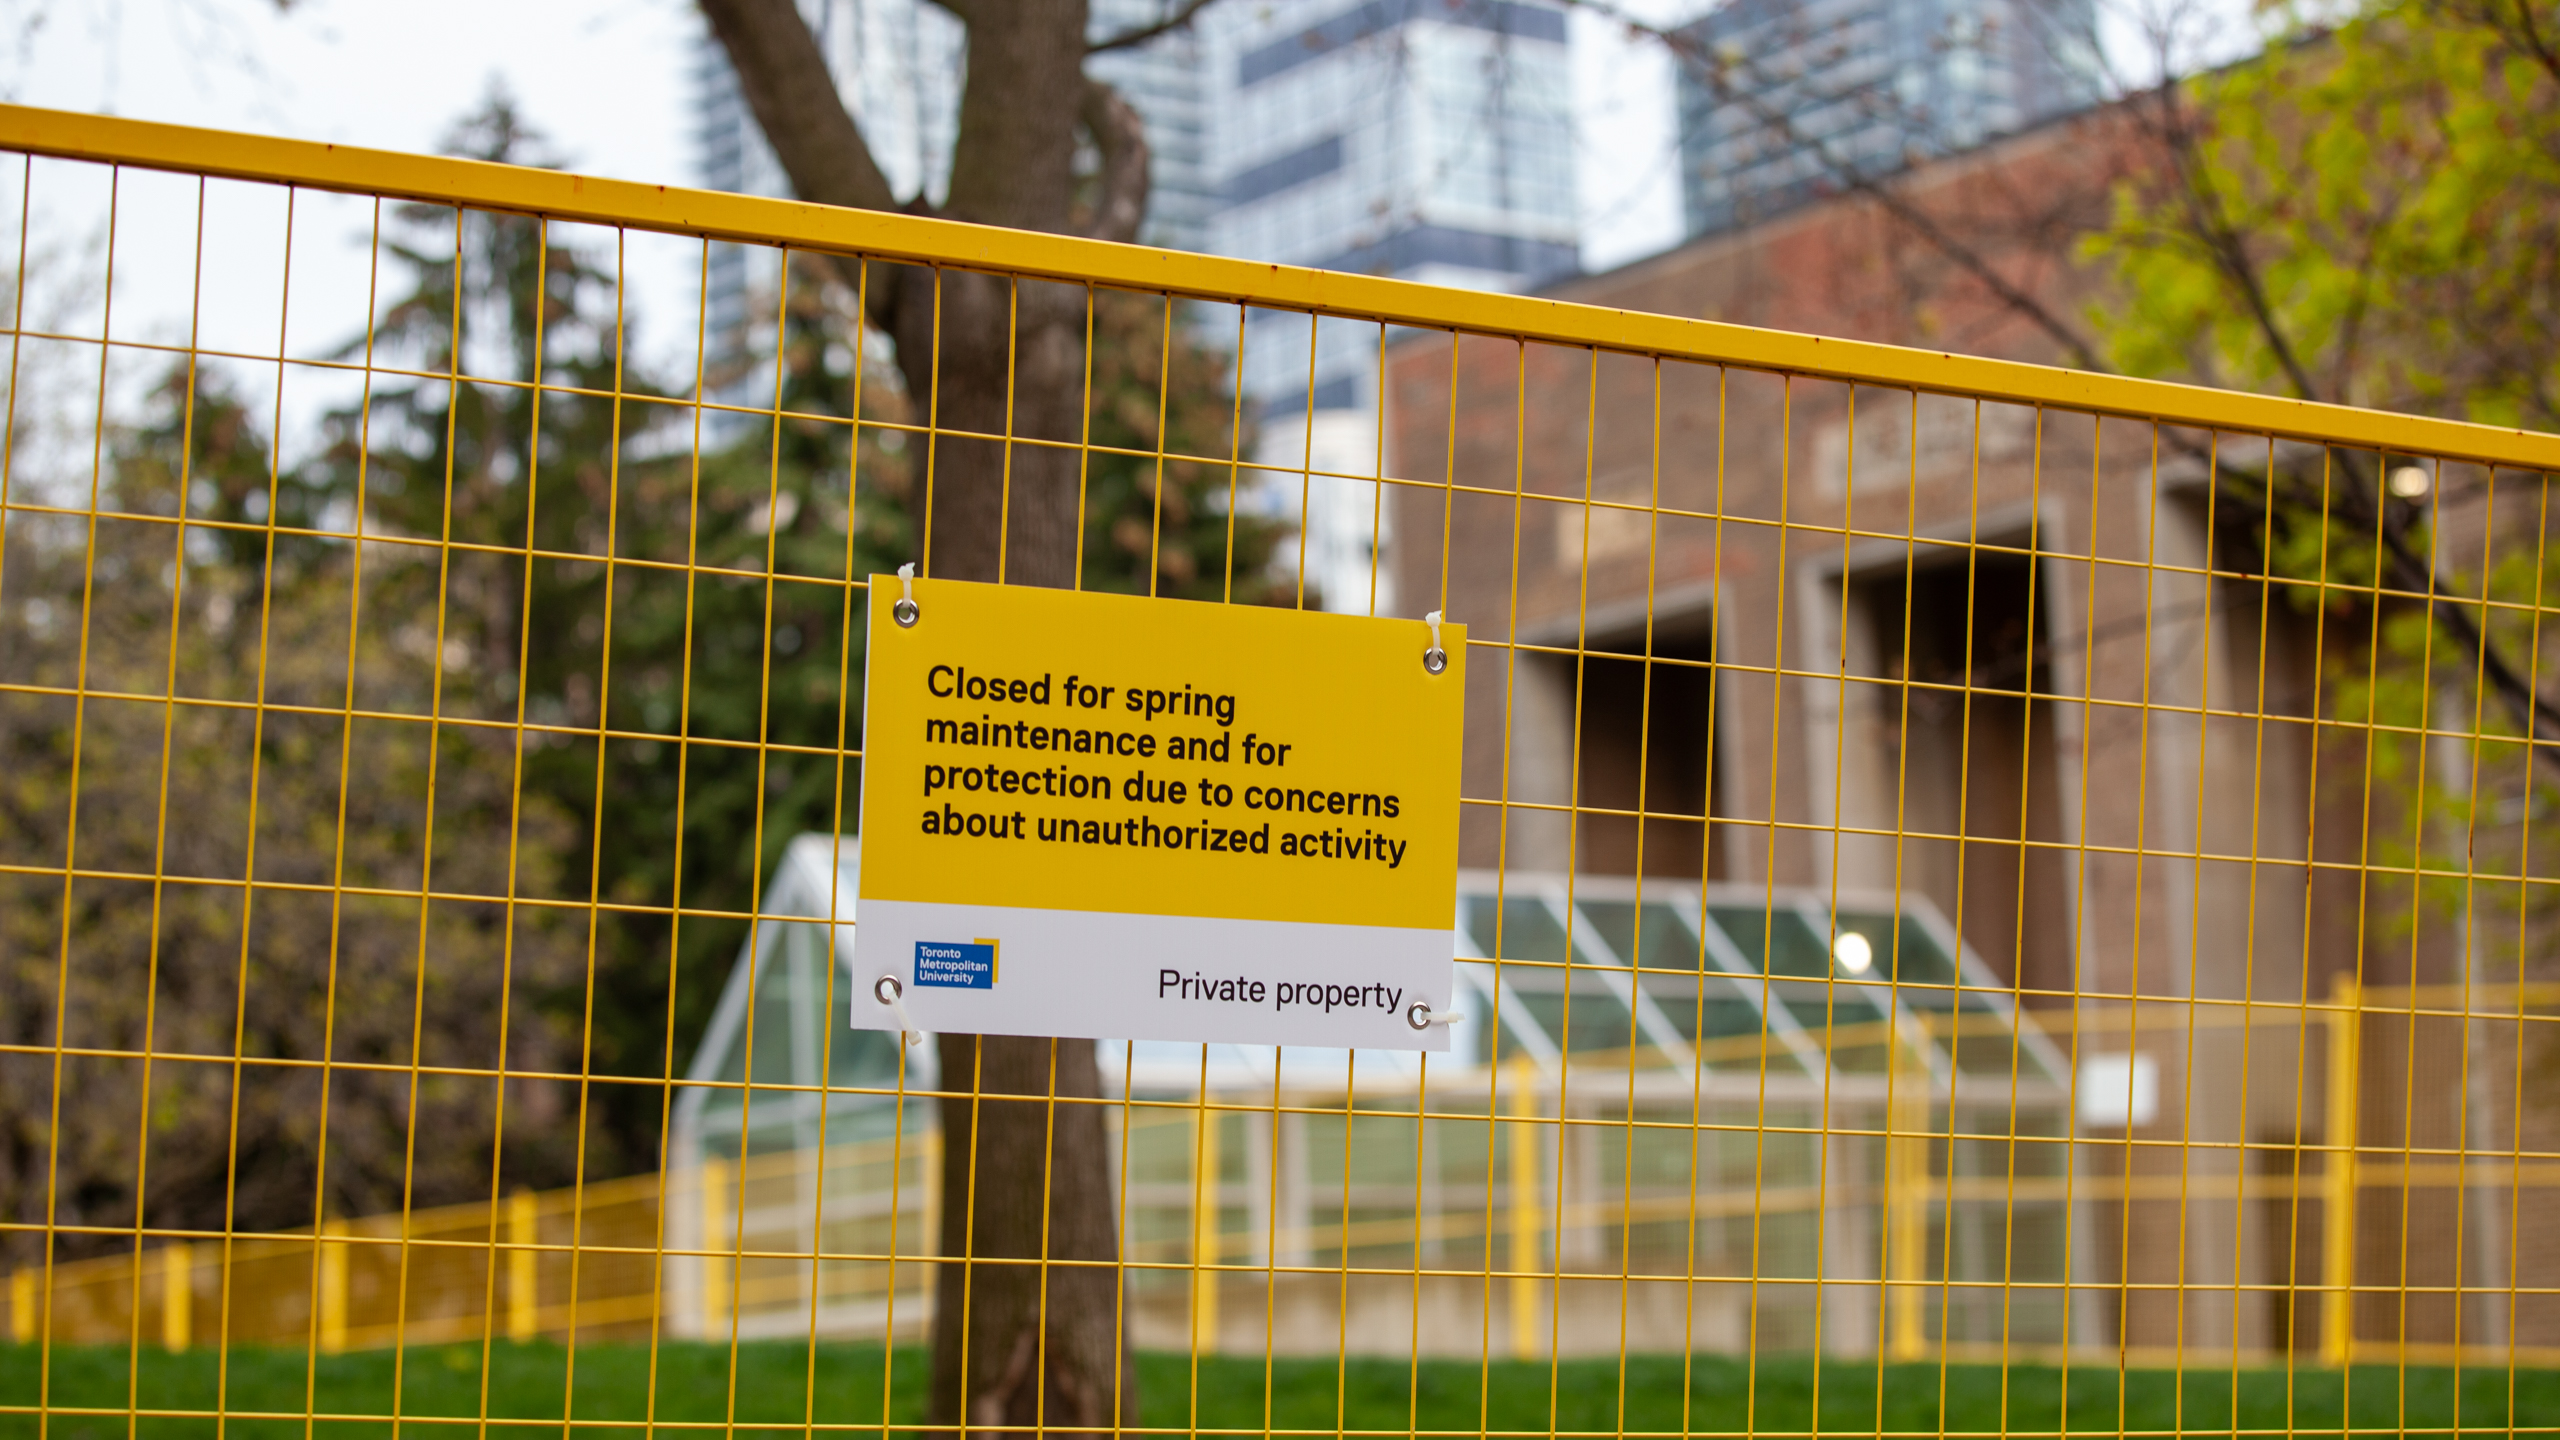 A sign which reads "Closed for spring maintenance and for protection due to concerns about unauthorized activity" put on the fences restricting access to the Kerr Quad